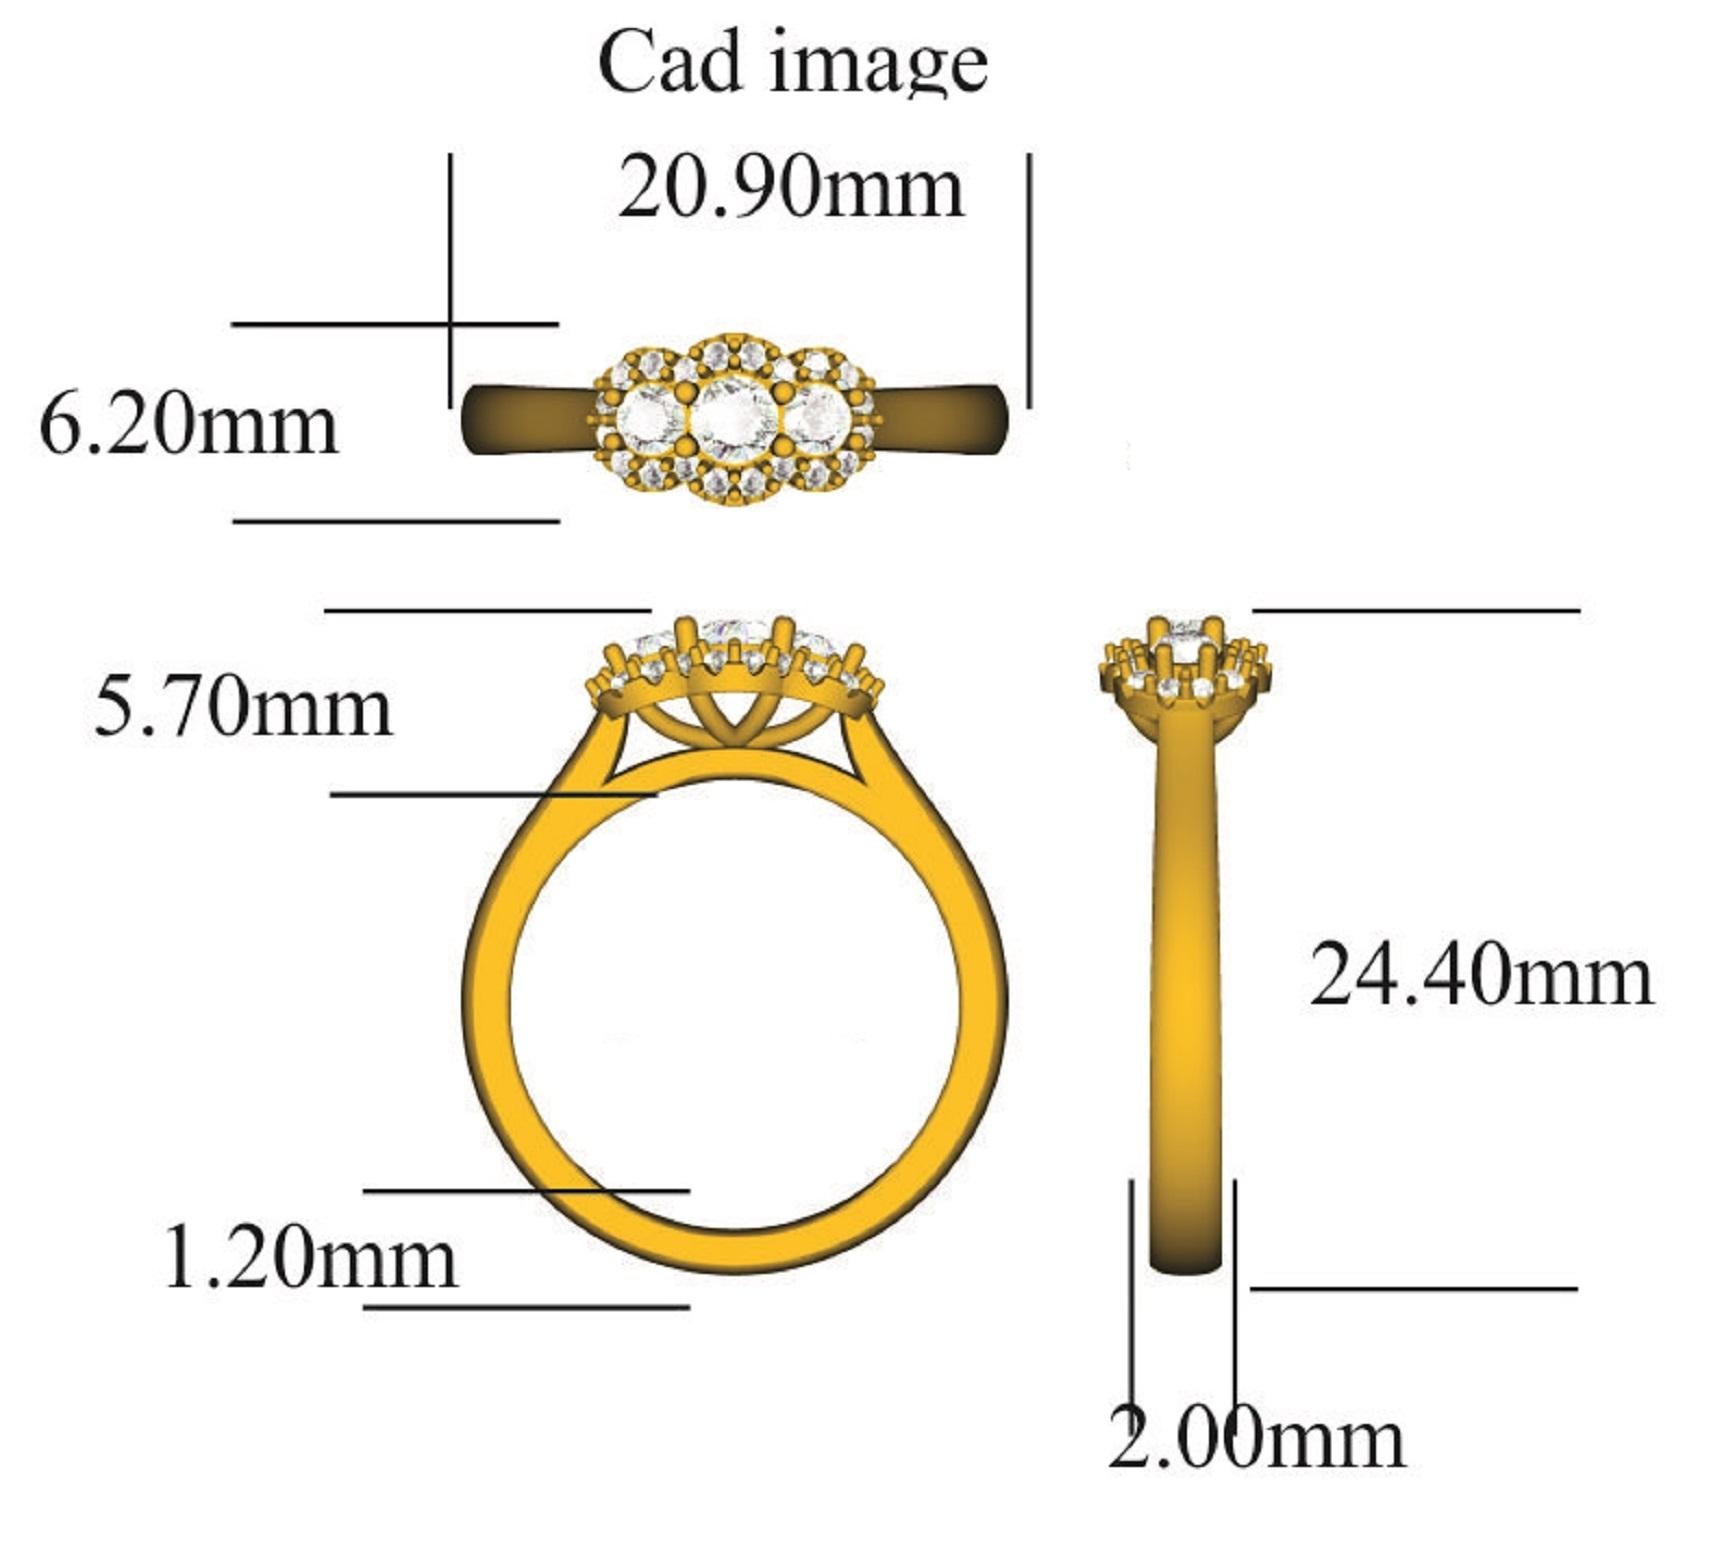 This Three stone surrounded with small Diamond Engagement Ring in 14 Karat gold showcases 0.50 carats of sparkling 23 round diamond set in prong and stackable prong setting. Featuring a fabulous cluster design and a highly polished gold finish, this